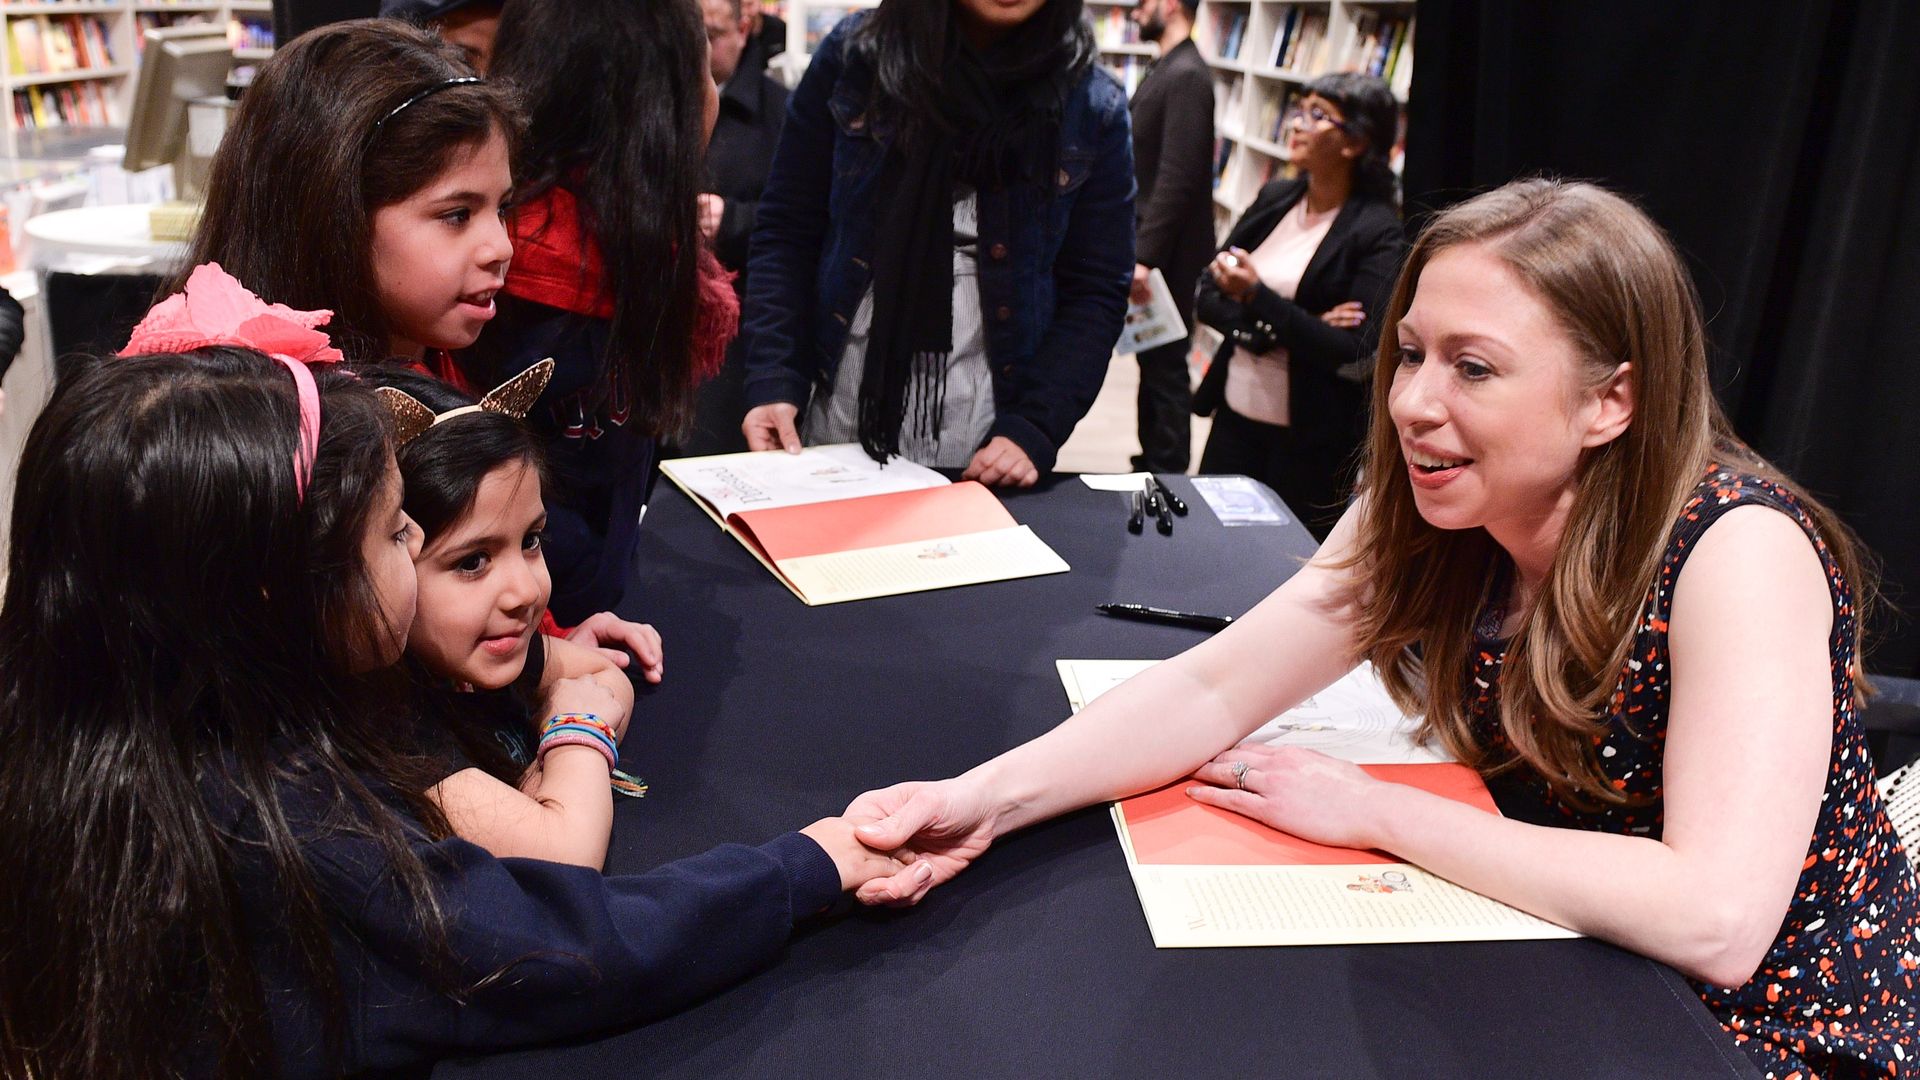 Chelsea Clinton signs copies of her new book 'She Persisted Around the World: 13 Women Who Changed History' at Indigo Sherway on April 11, 2018 in Toronto, Canada.